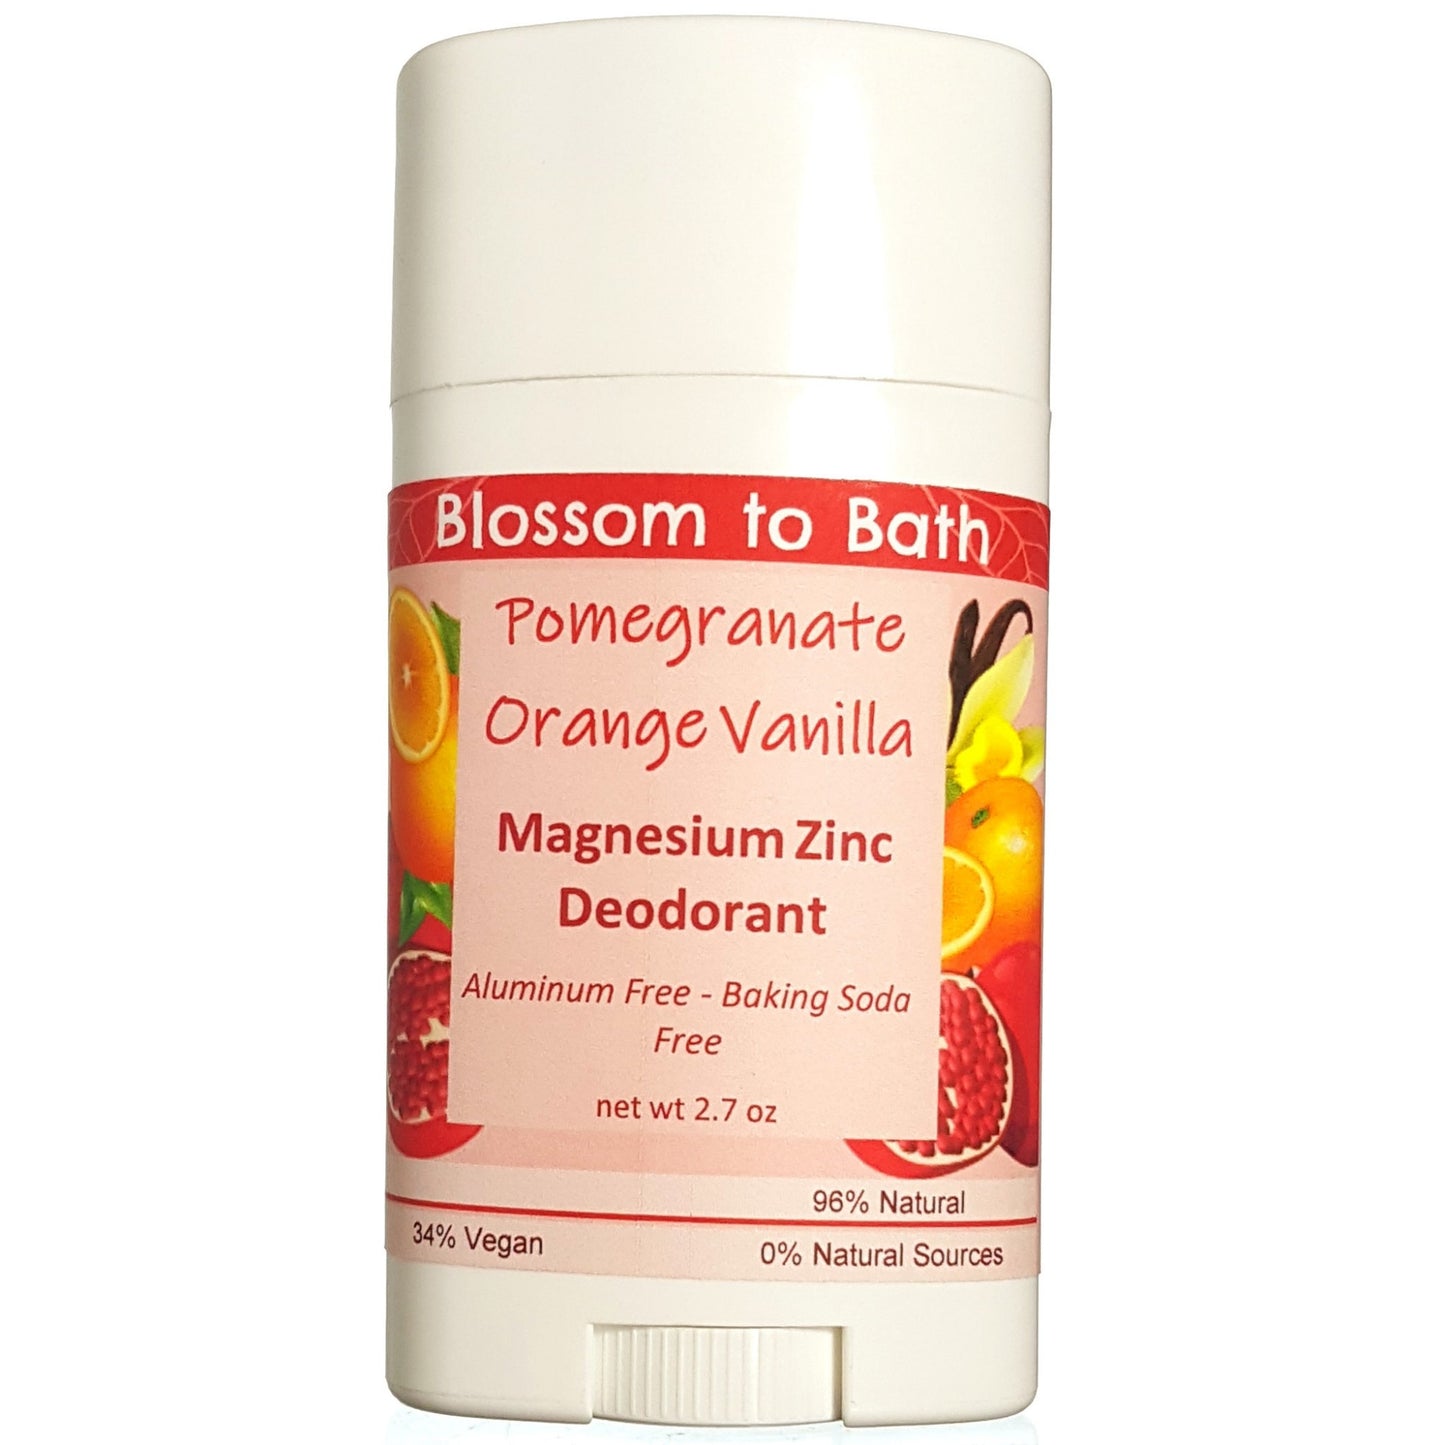 Buy Blossom to Bath Pomegranate Orange Vanilla Magnesium Zinc Deodorant from Flowersong Soap Studio.  Long lasting protection made from organic botanicals and butters, made without baking soda, tested in the Arizona heat  